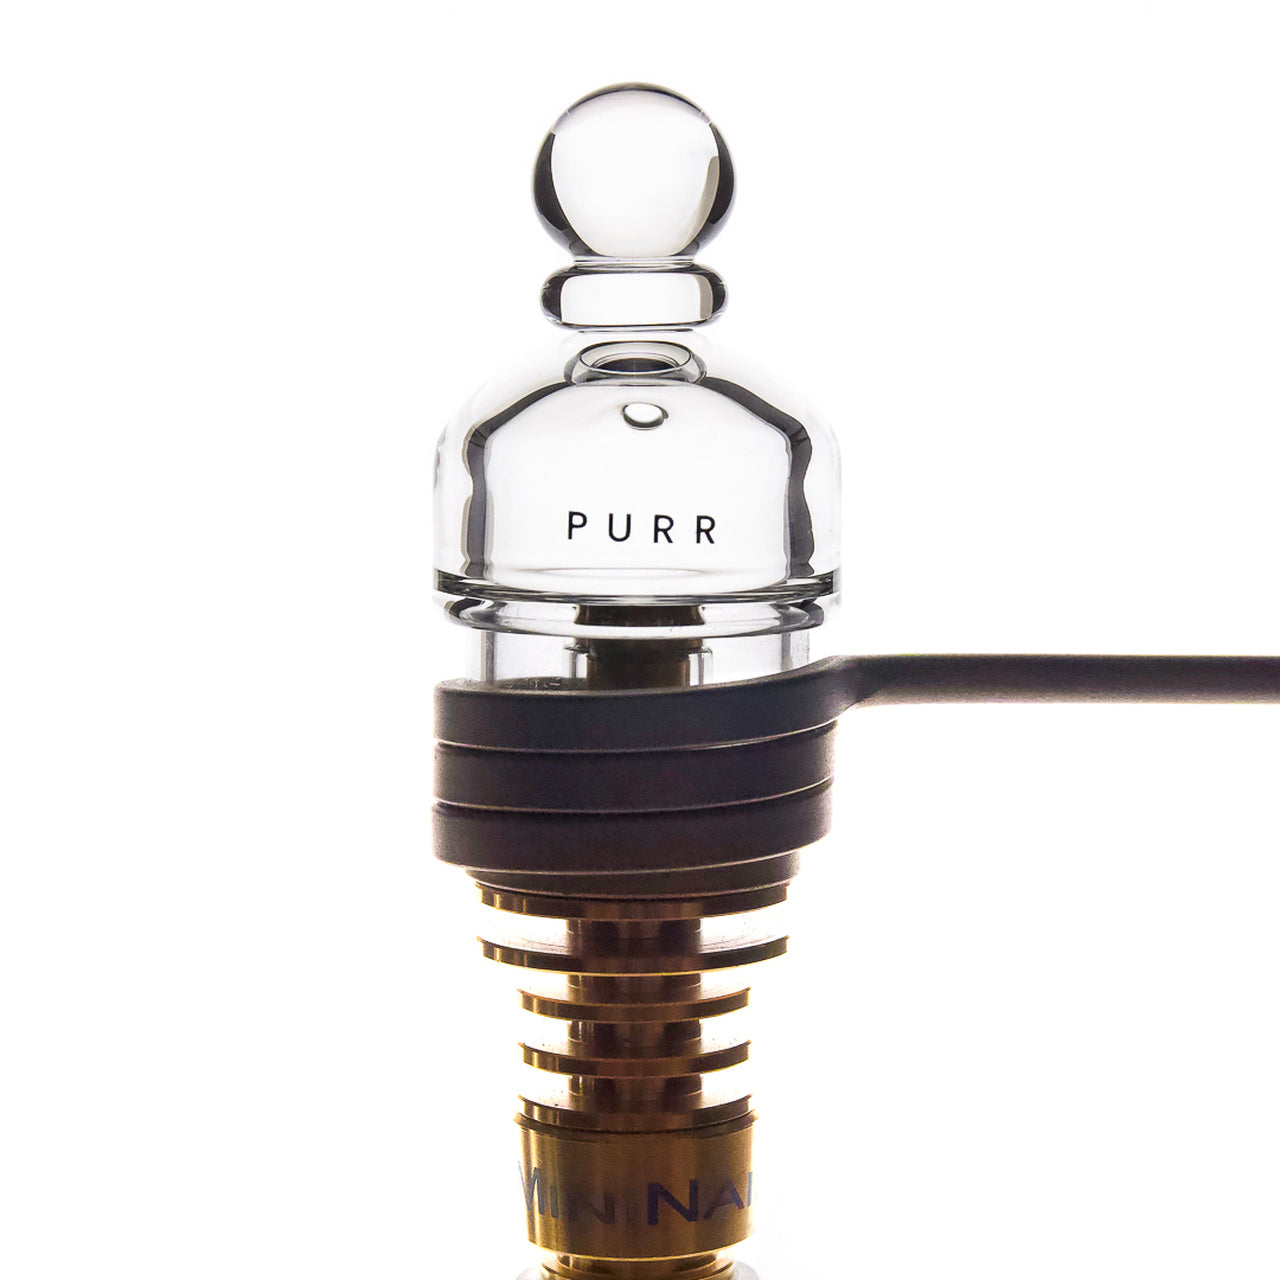 25mm Directional Airflow Glass Carb Cap